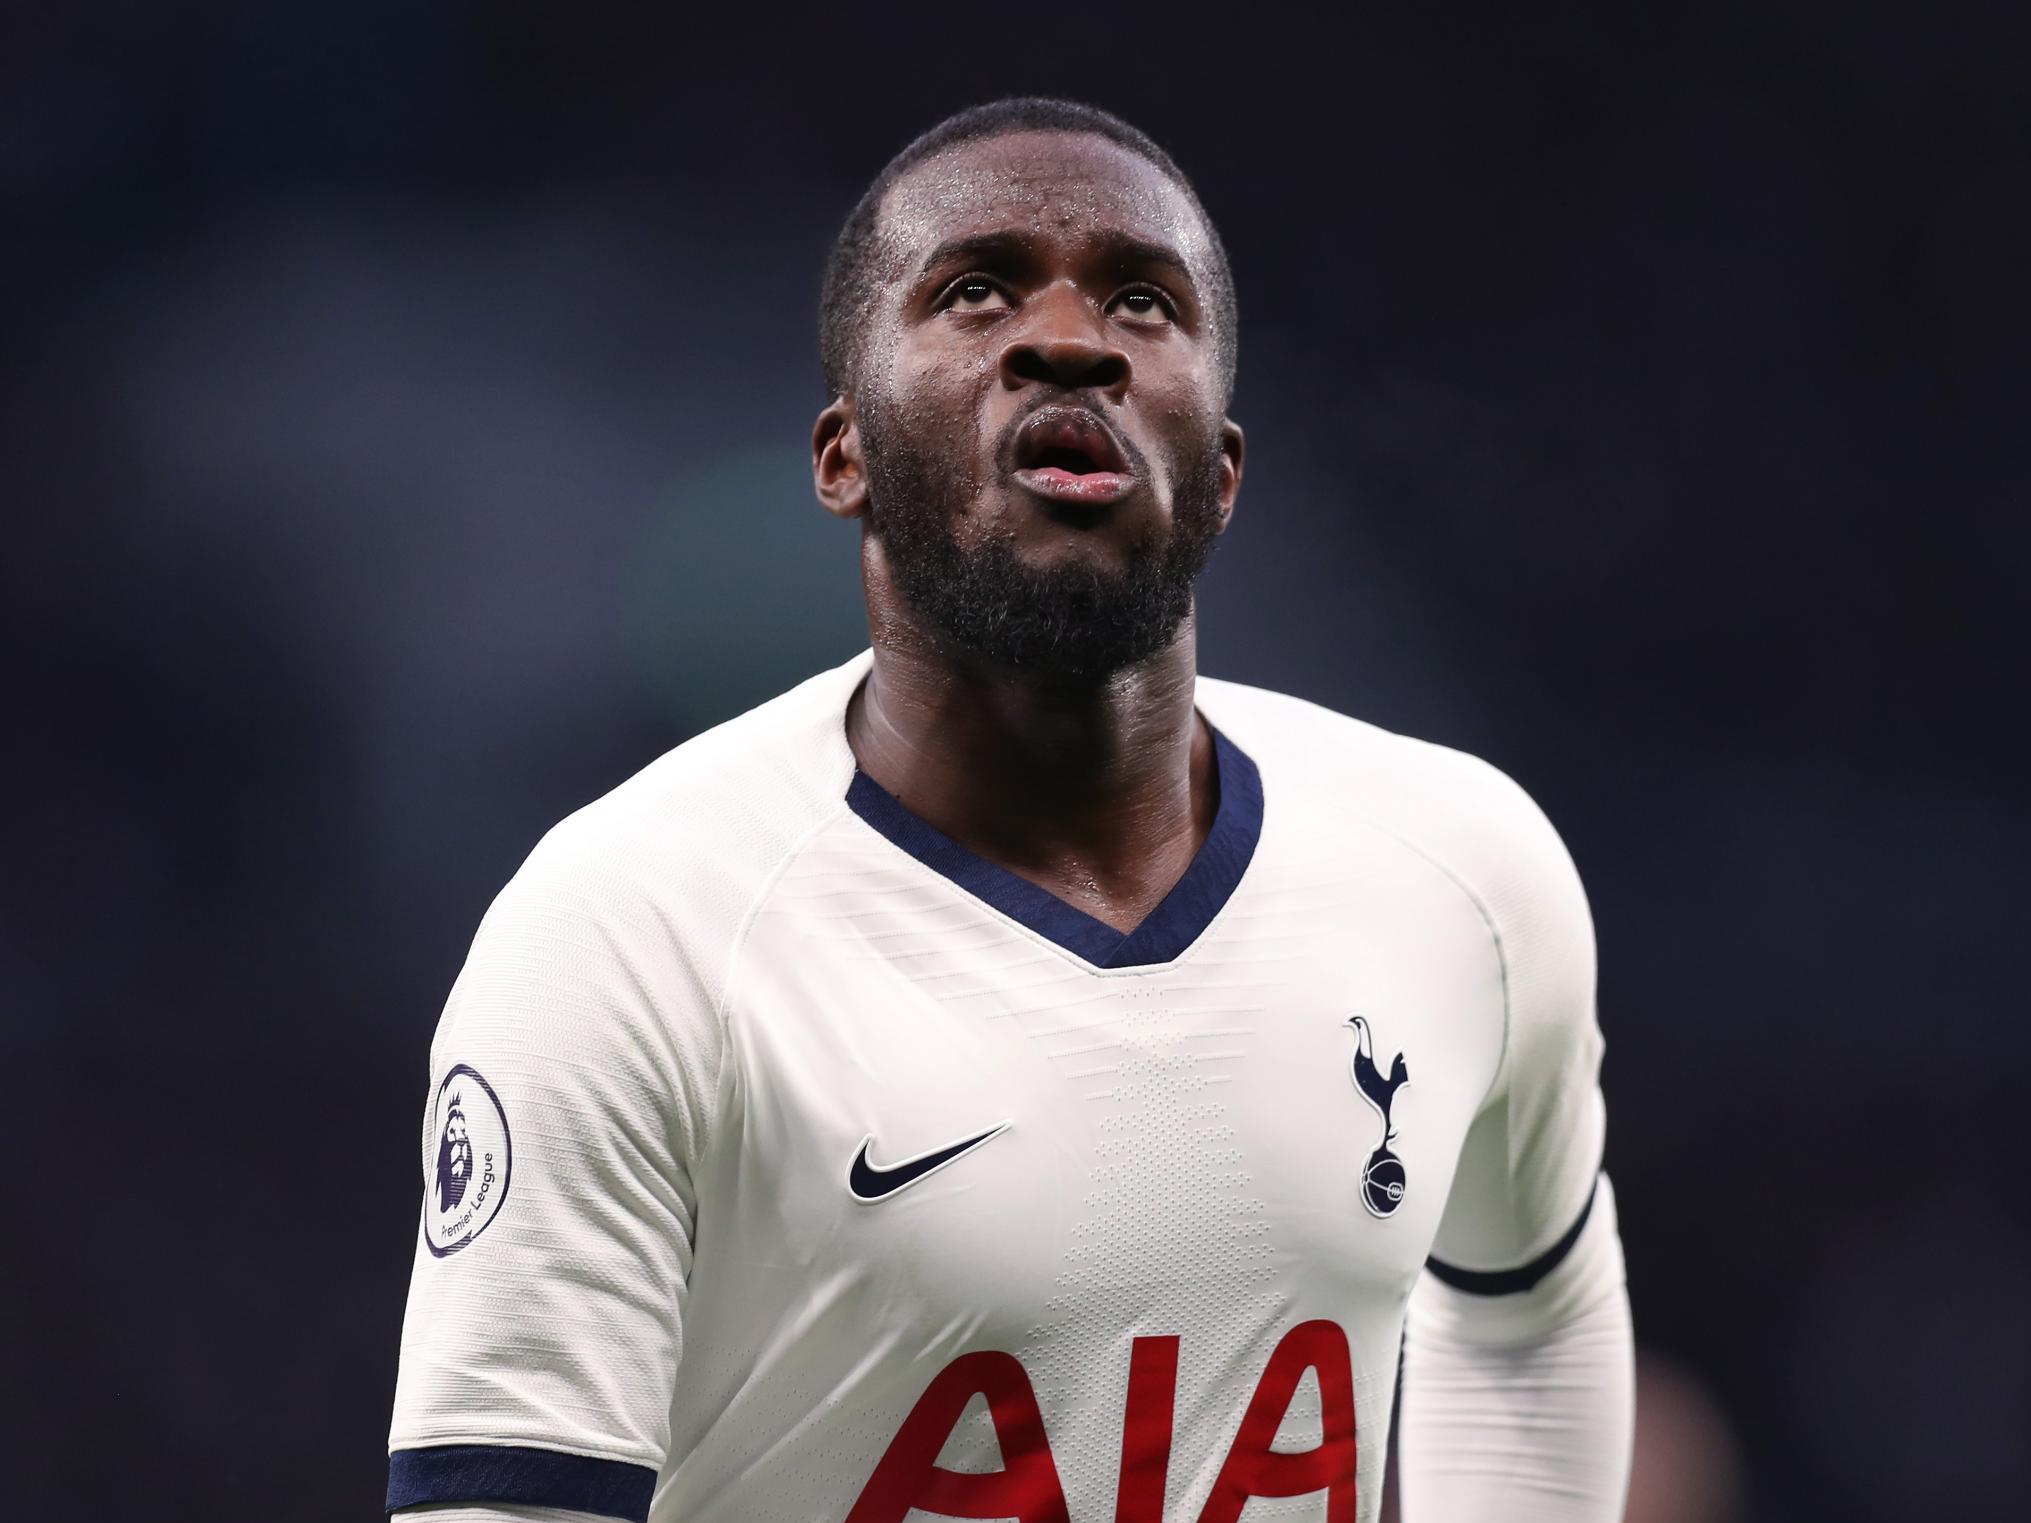 Tanguy Ndombele is back from a hip injury